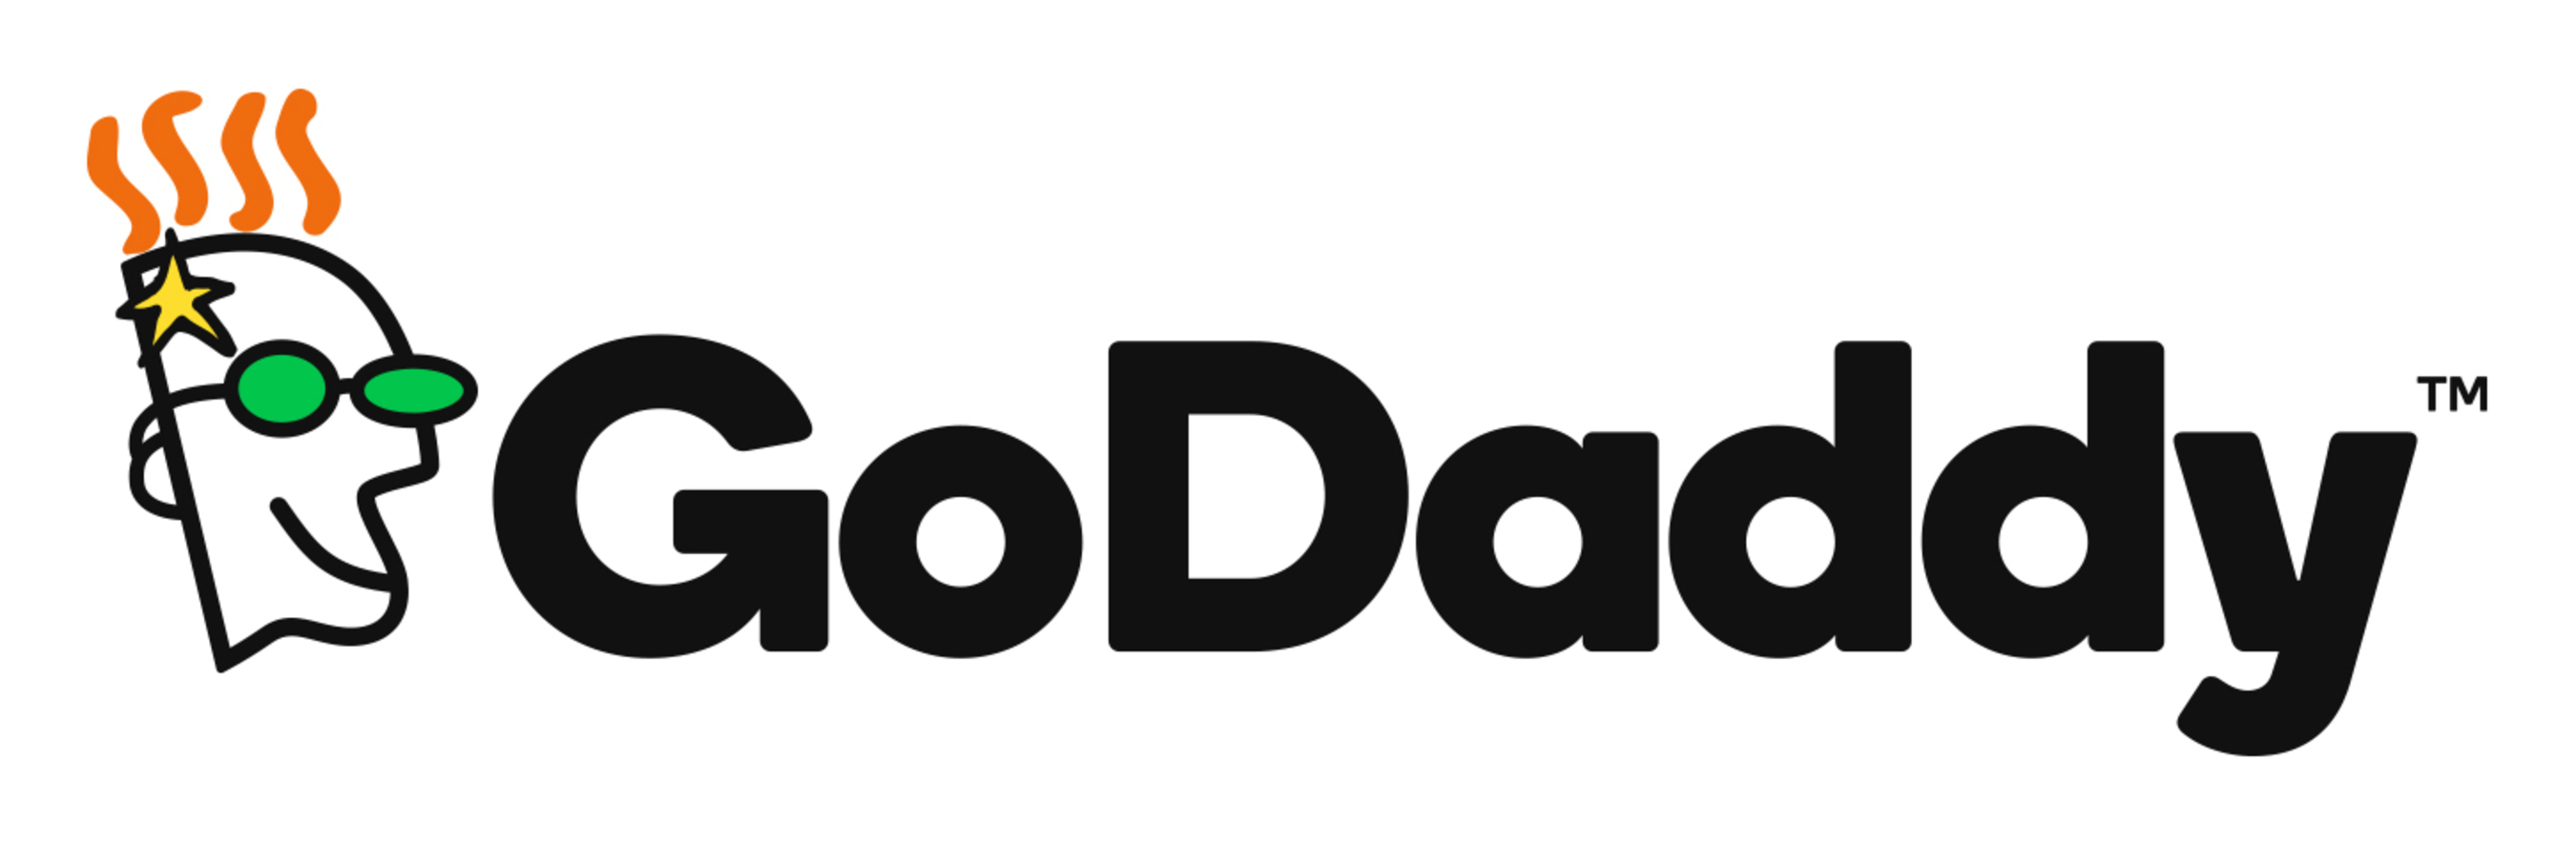 GoDaddy Acquires FreedomVoice To Accelerate The Delivery Of Communications  Services To Small Businesses